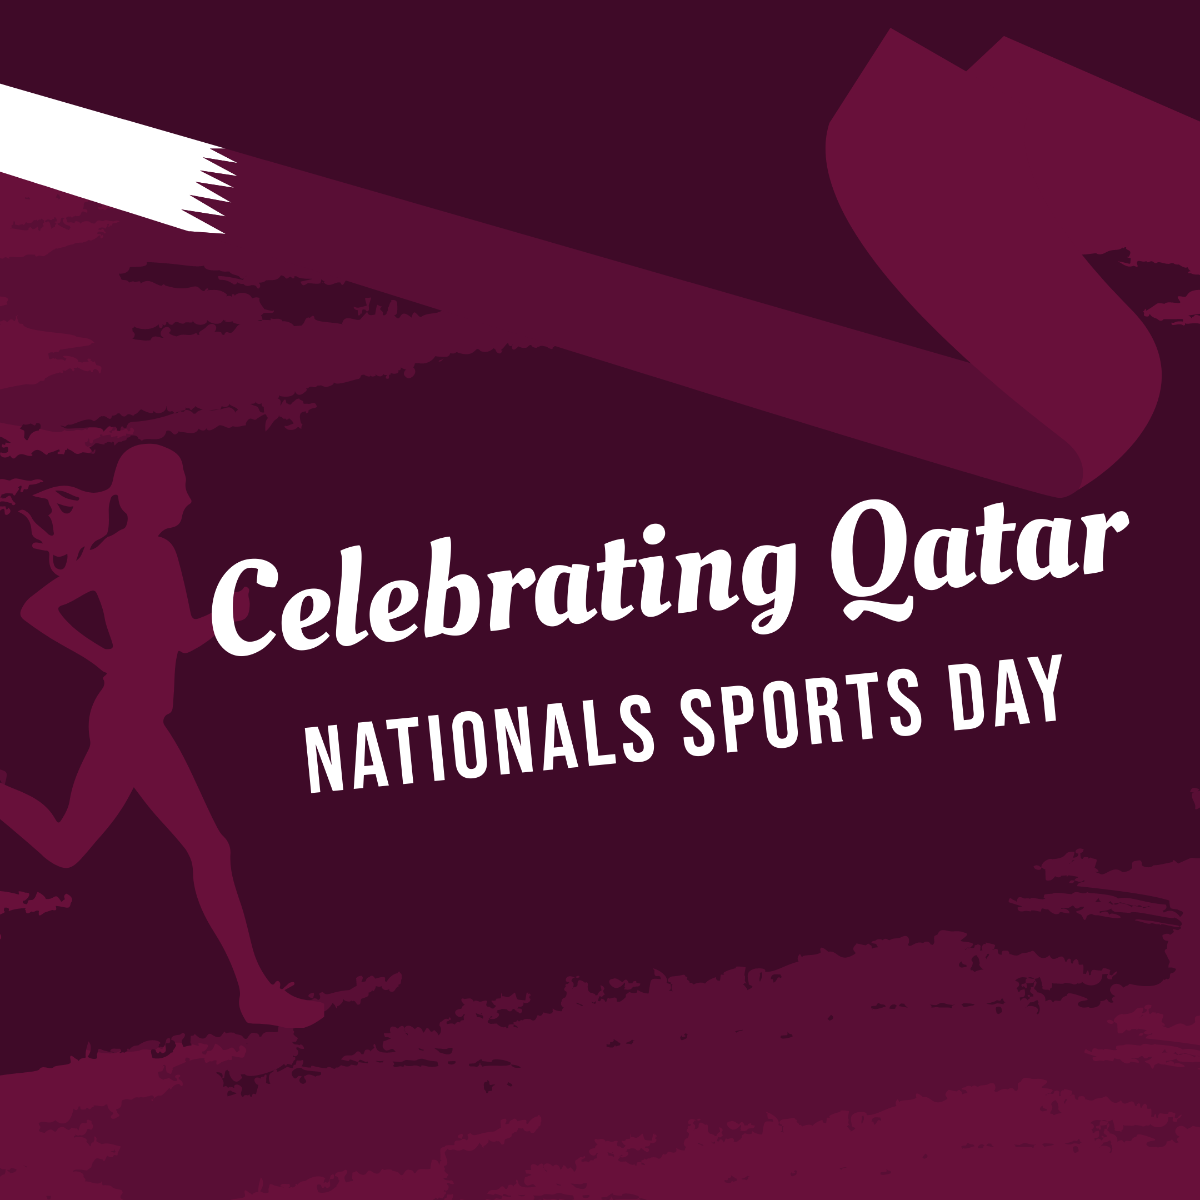 Qatar National Sports Day Instagram Post Template